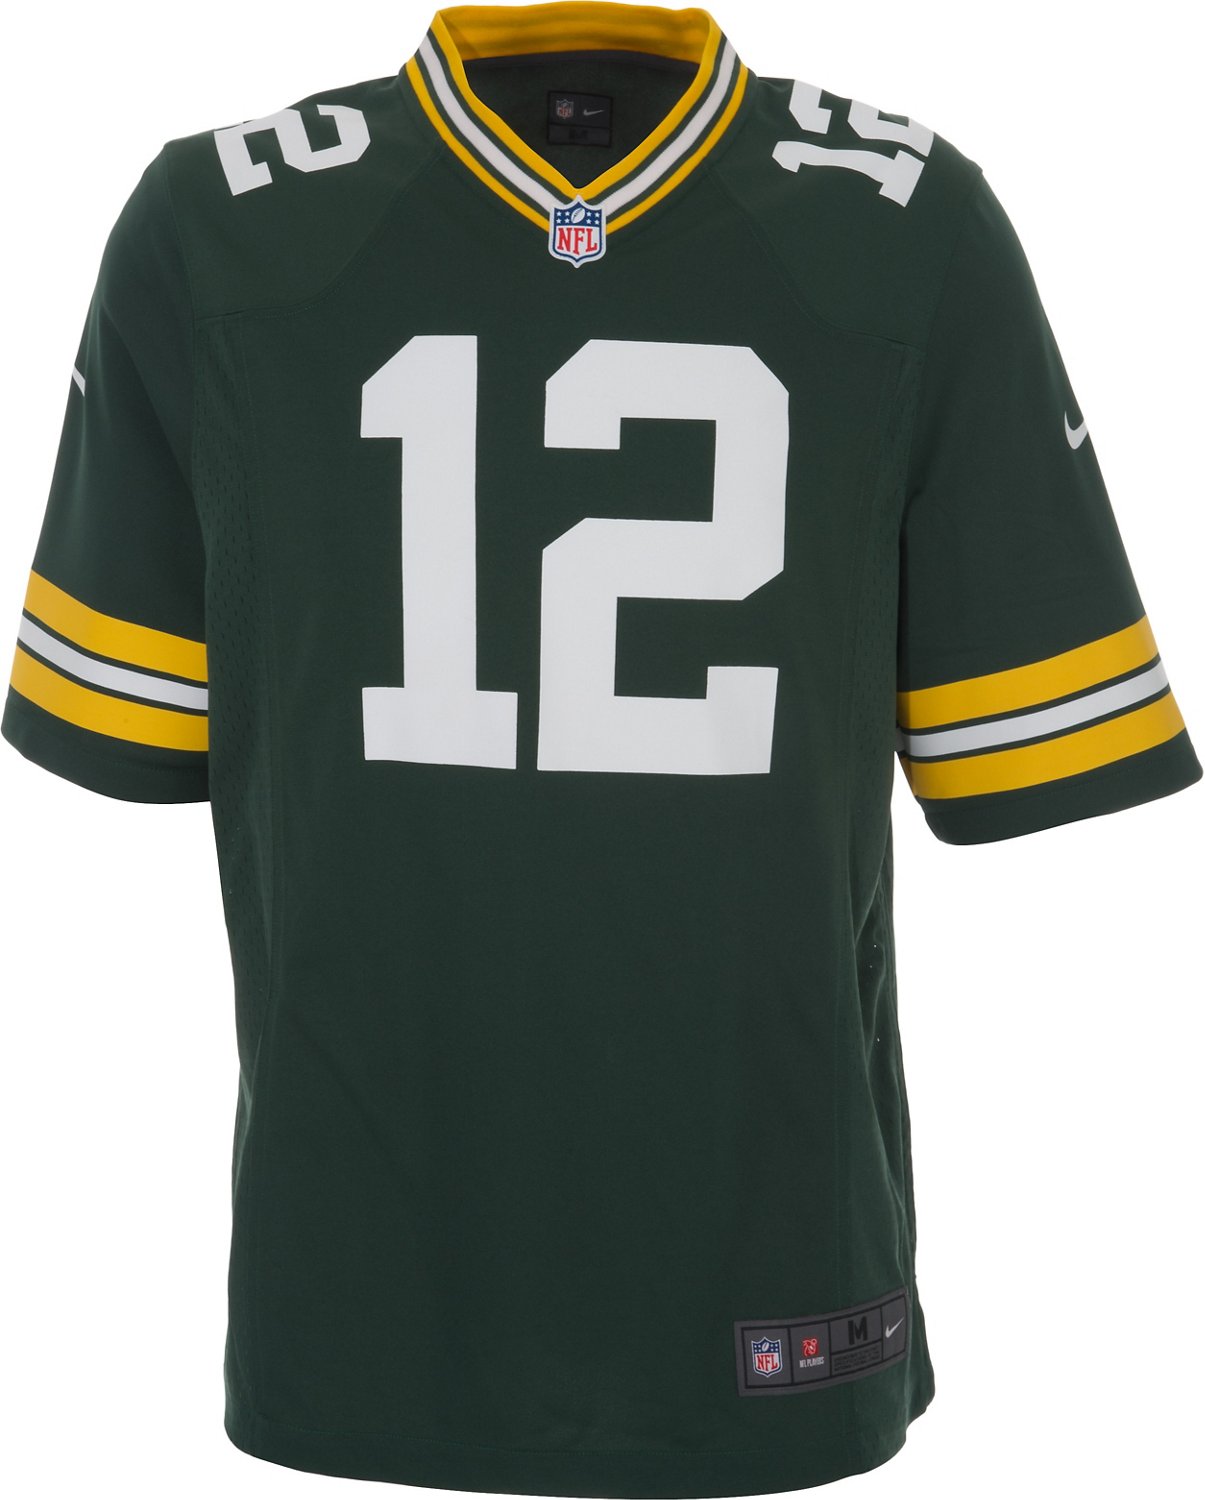 Nike Men's Green Bay Packers Aaron Rodgers 12 Game Jersey   Academy